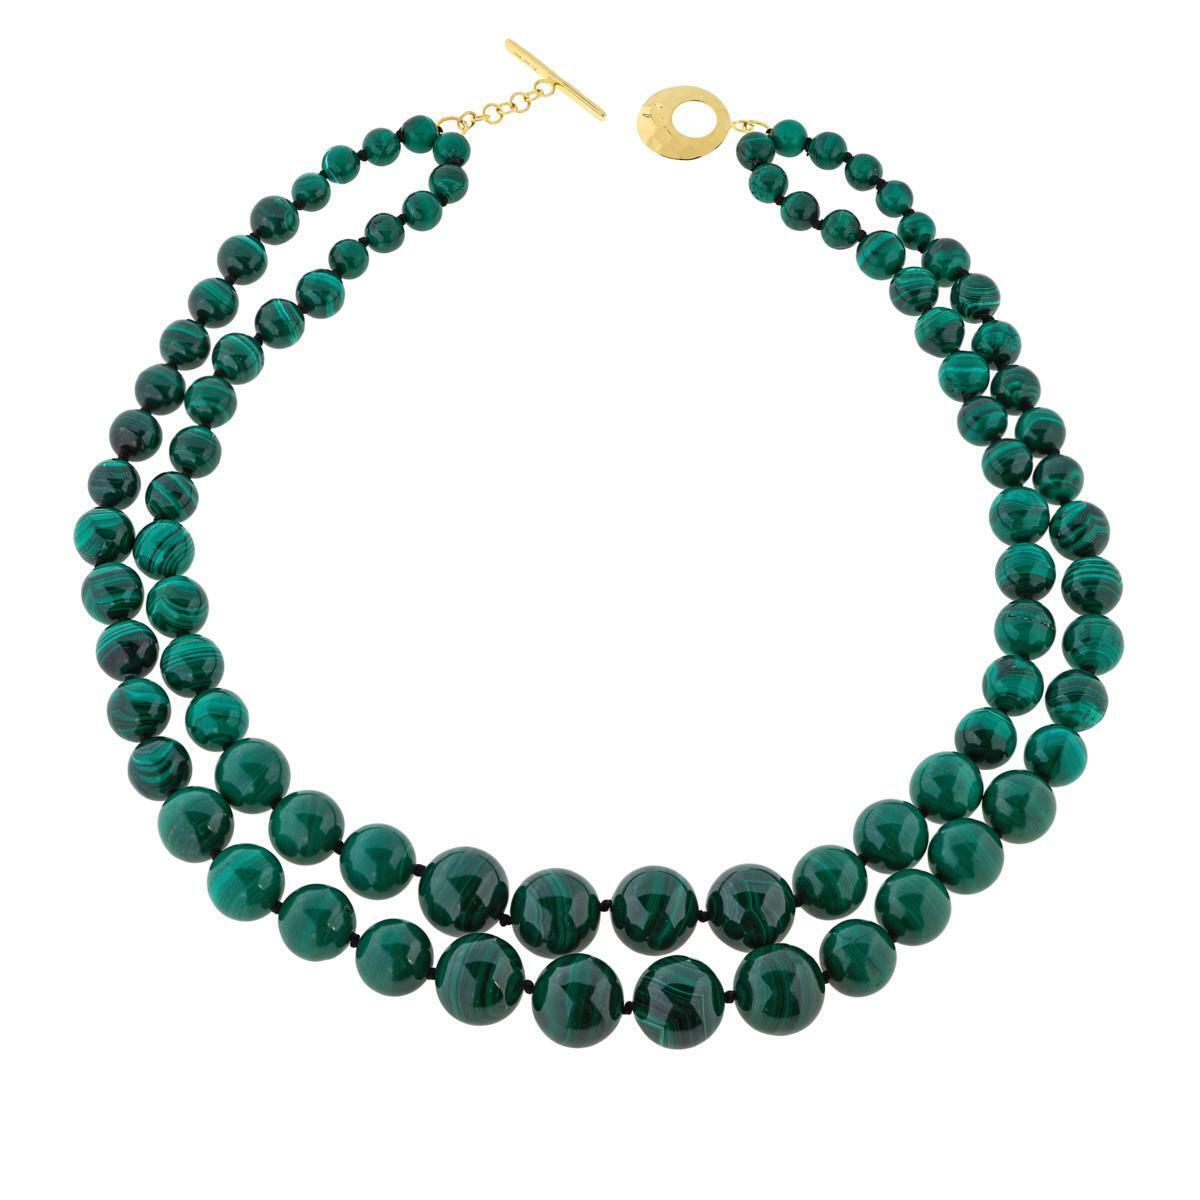 Rarities Malachite Bead Graduated 2-Strand Necklace with Toggle Clasp